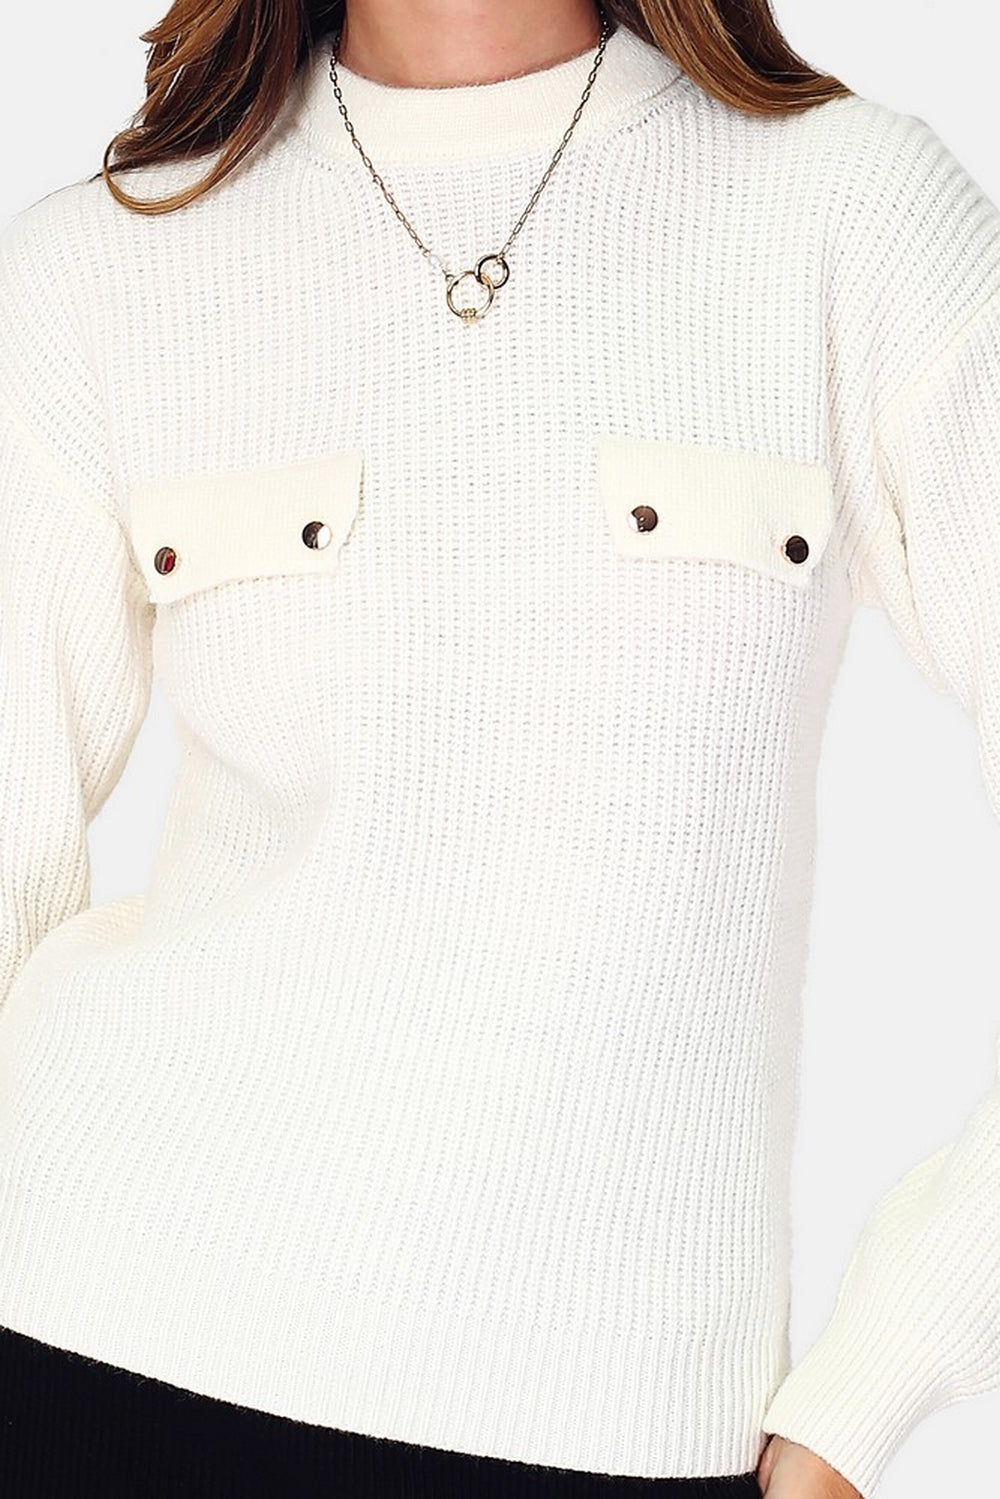 Beaded ribbed knit round neck sweater, chest pockets with long sleeve